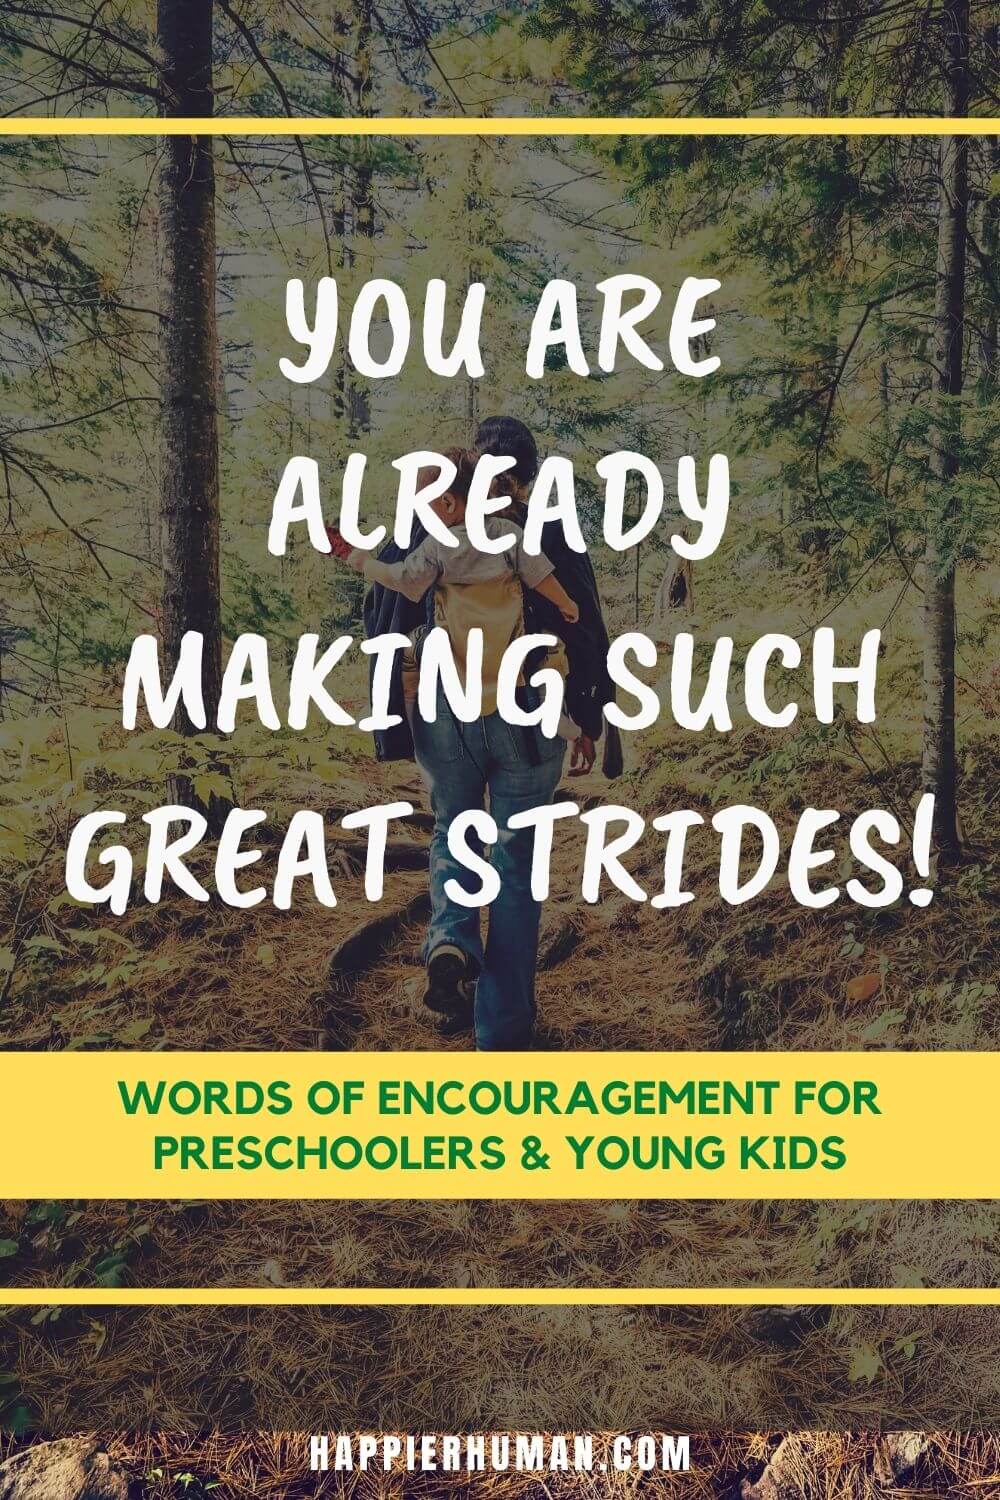 Words of Encouragement for Preschoolers - You are already making such great strides! | encouraging note for child from teacher | words of encouragement for elementary school students | list of words of encouragement for students